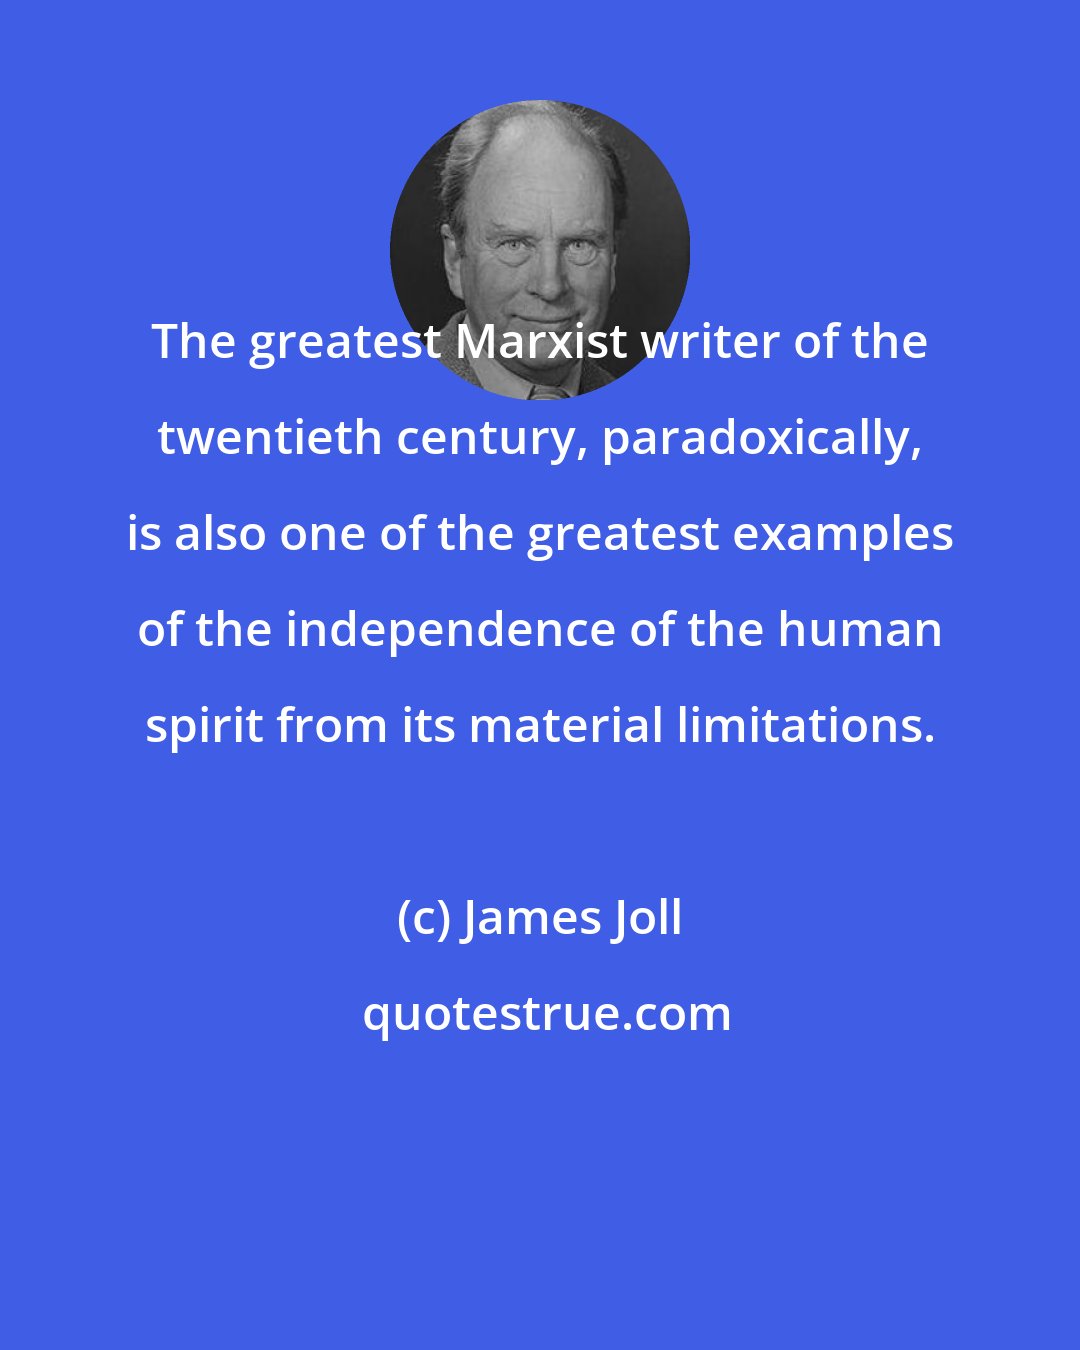 James Joll: The greatest Marxist writer of the twentieth century, paradoxically, is also one of the greatest examples of the independence of the human spirit from its material limitations.